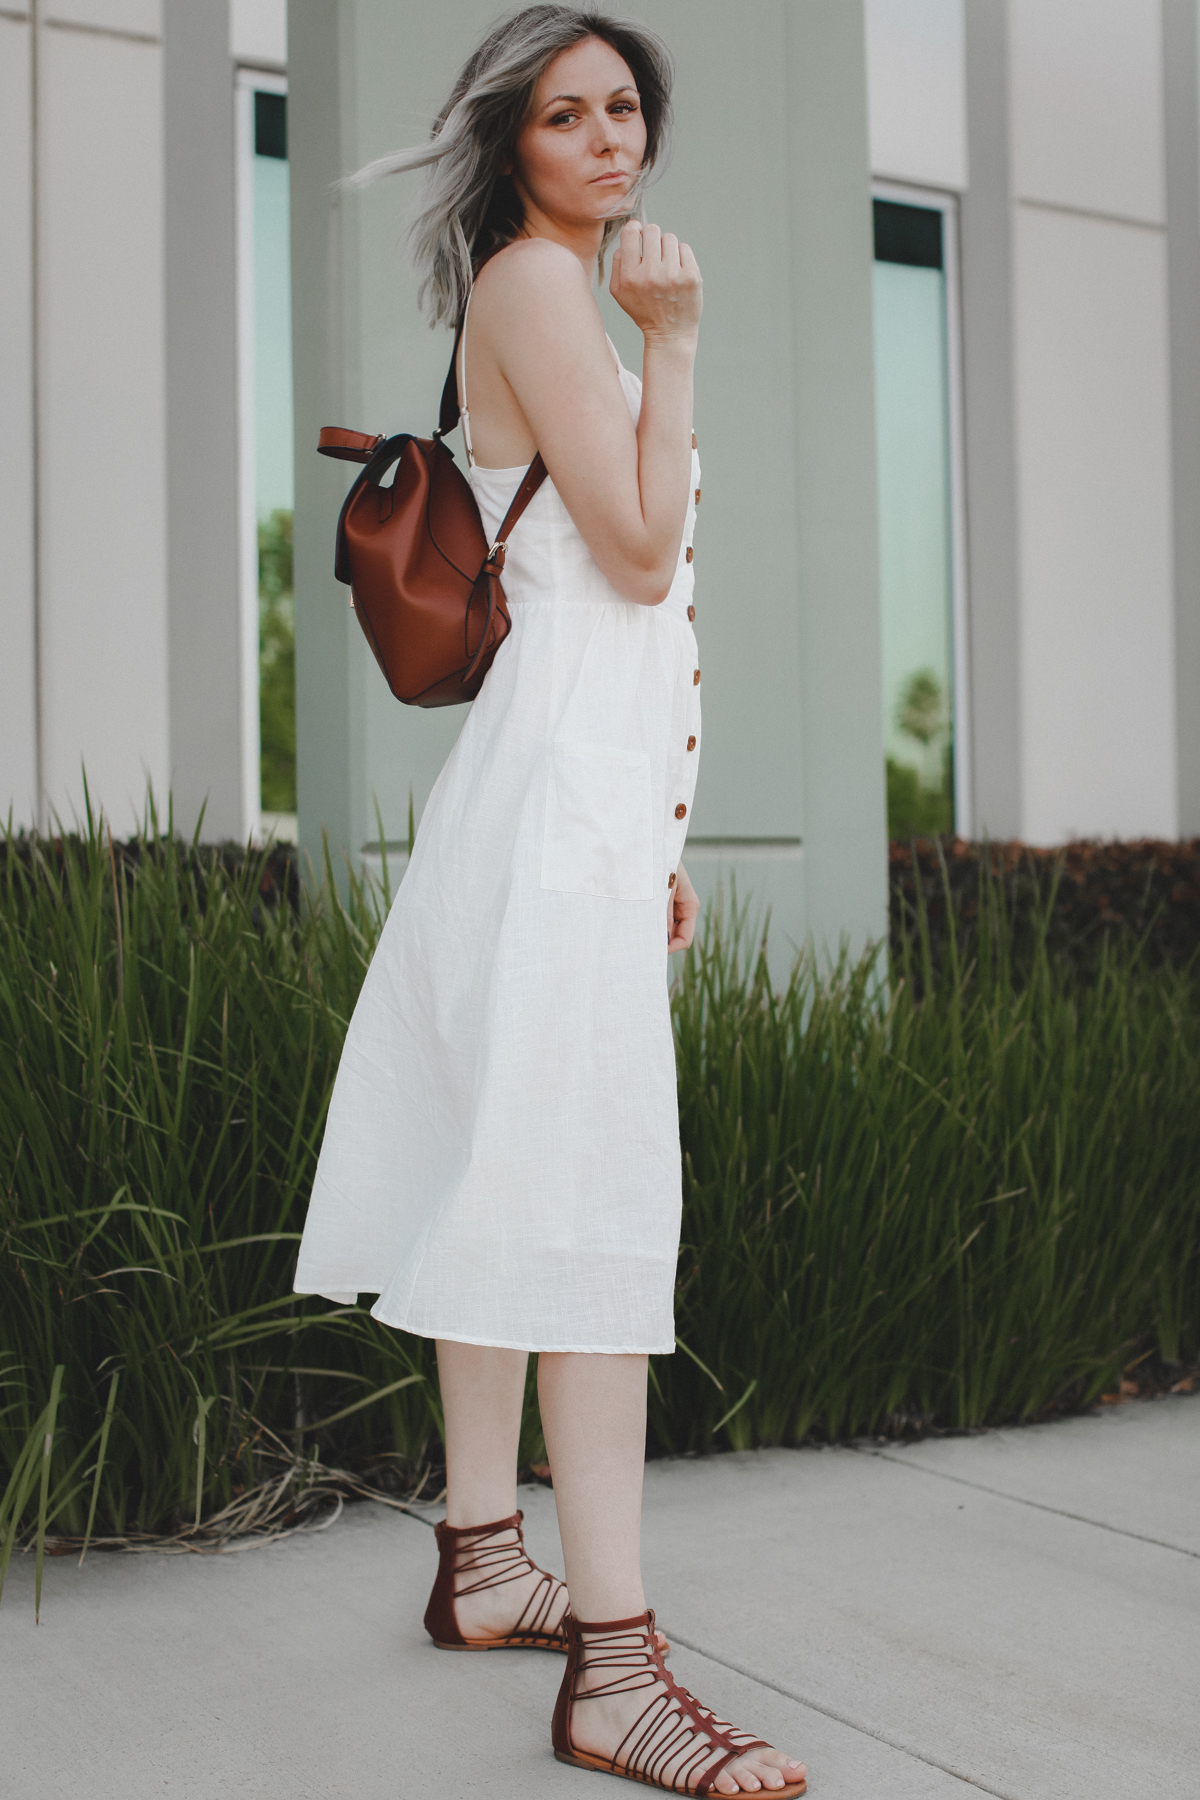 Casual outfit featuring a white midi dress and brown accessories